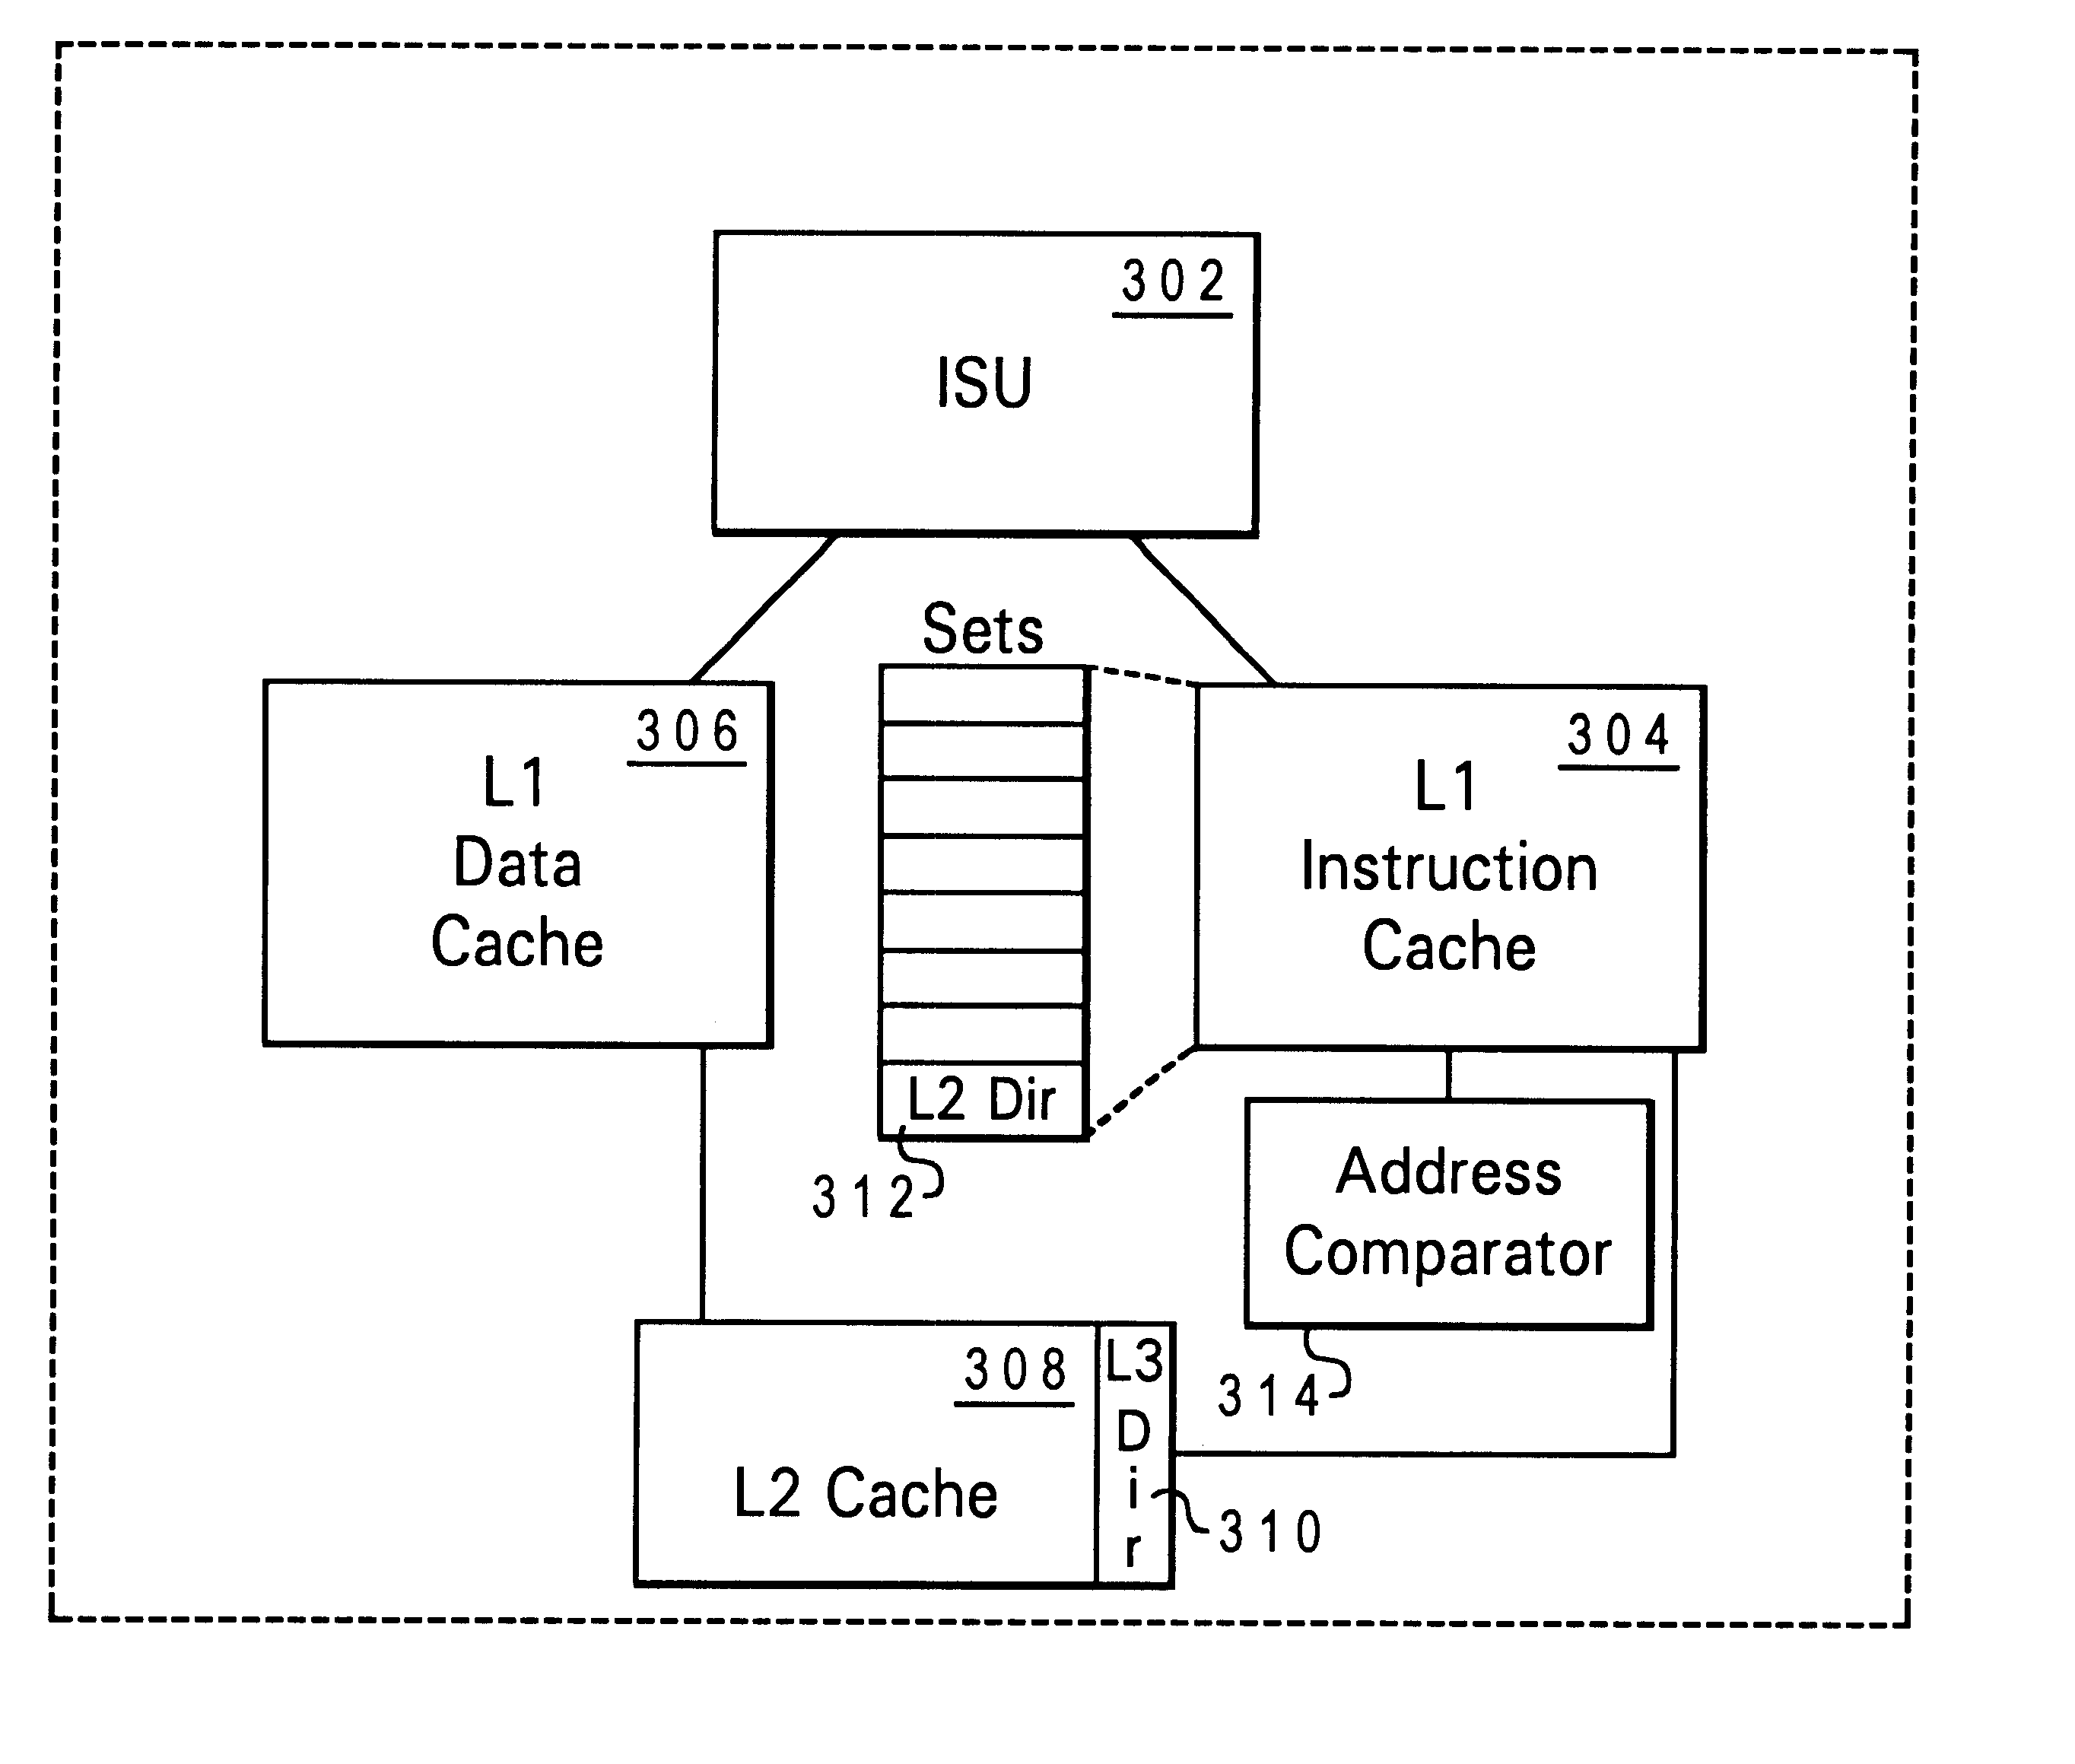 Integrated cache and directory structure for multi-level caches